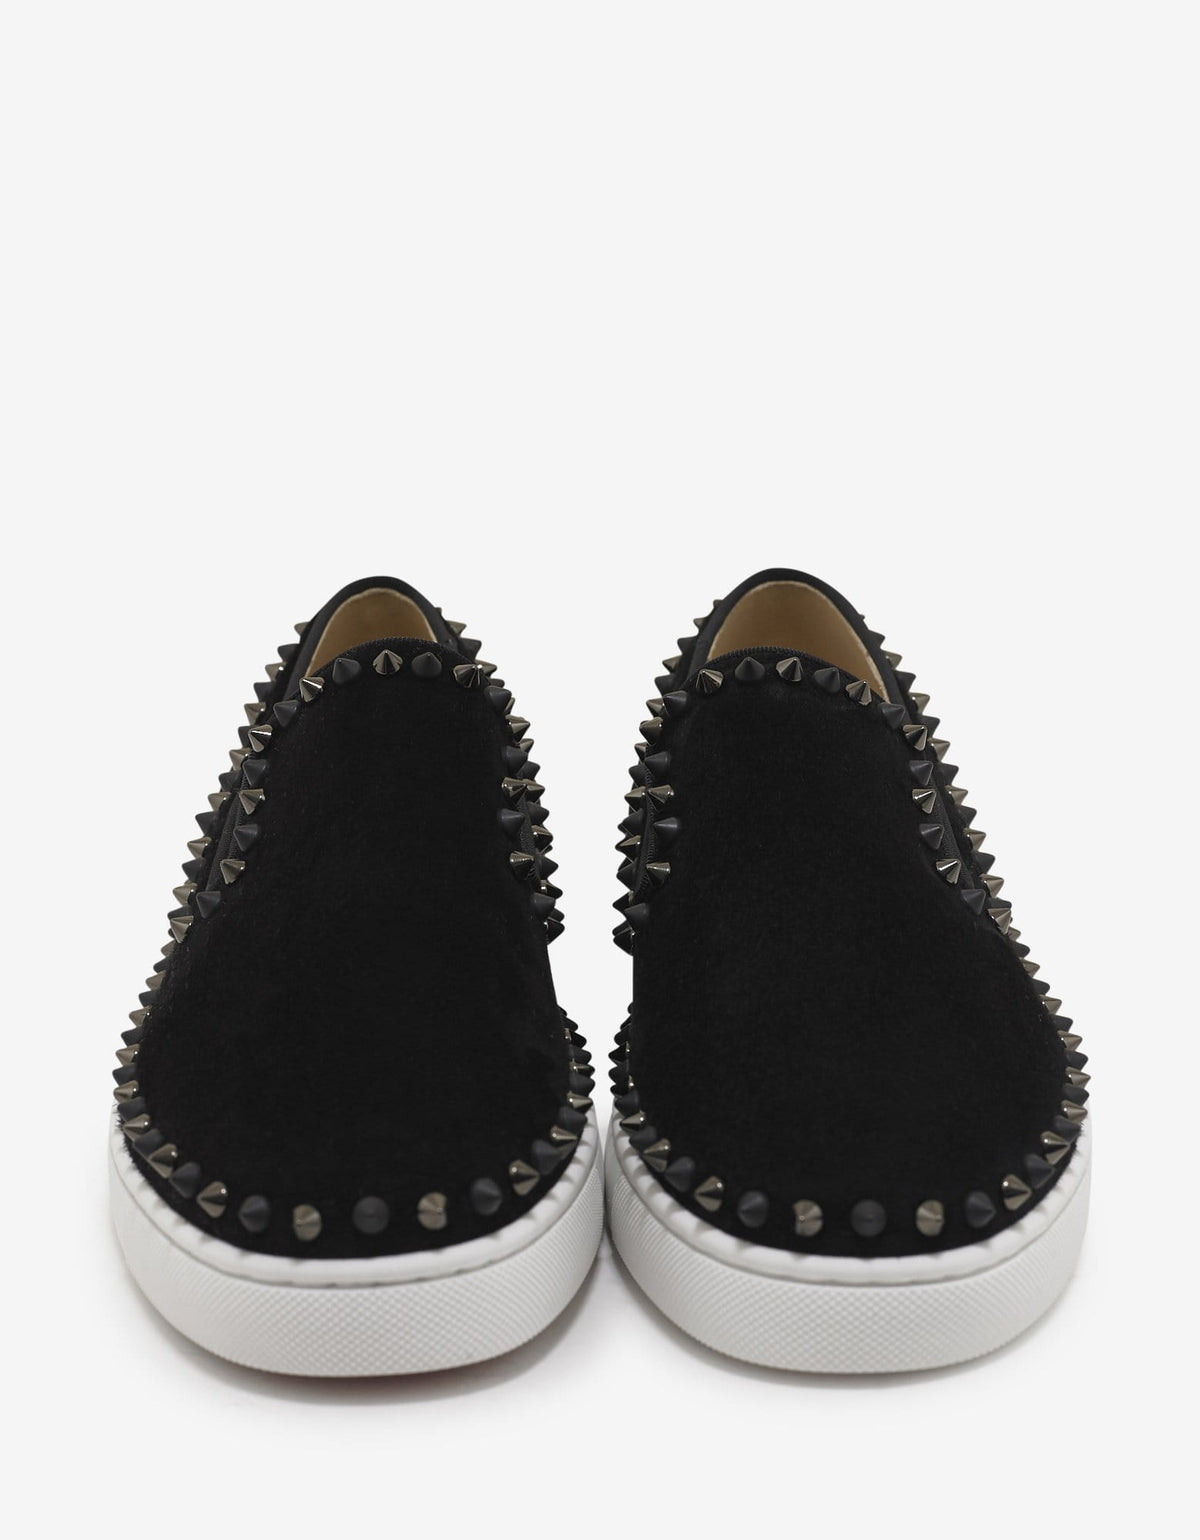 Christian Louboutin Pik Boat Flat Black Suede Mix Spikes Trainers